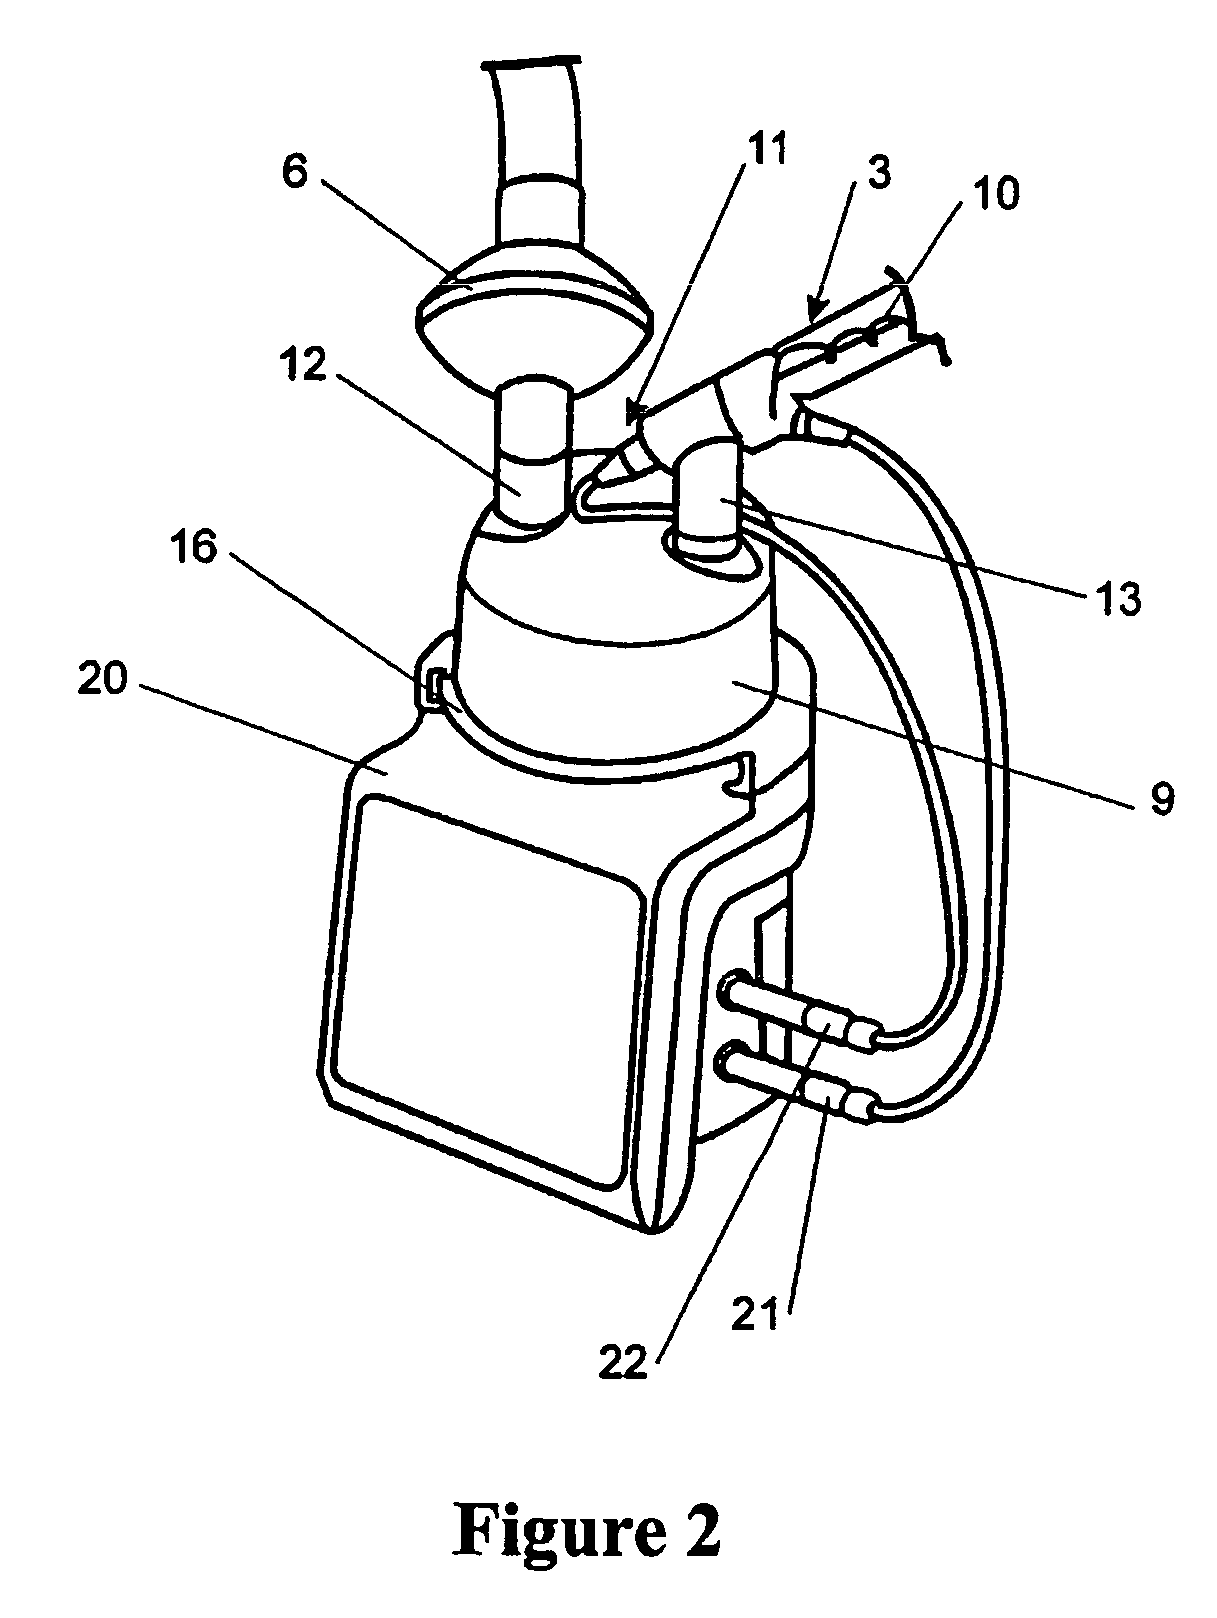 Apparatus used for the humidification of gases in medical procedures